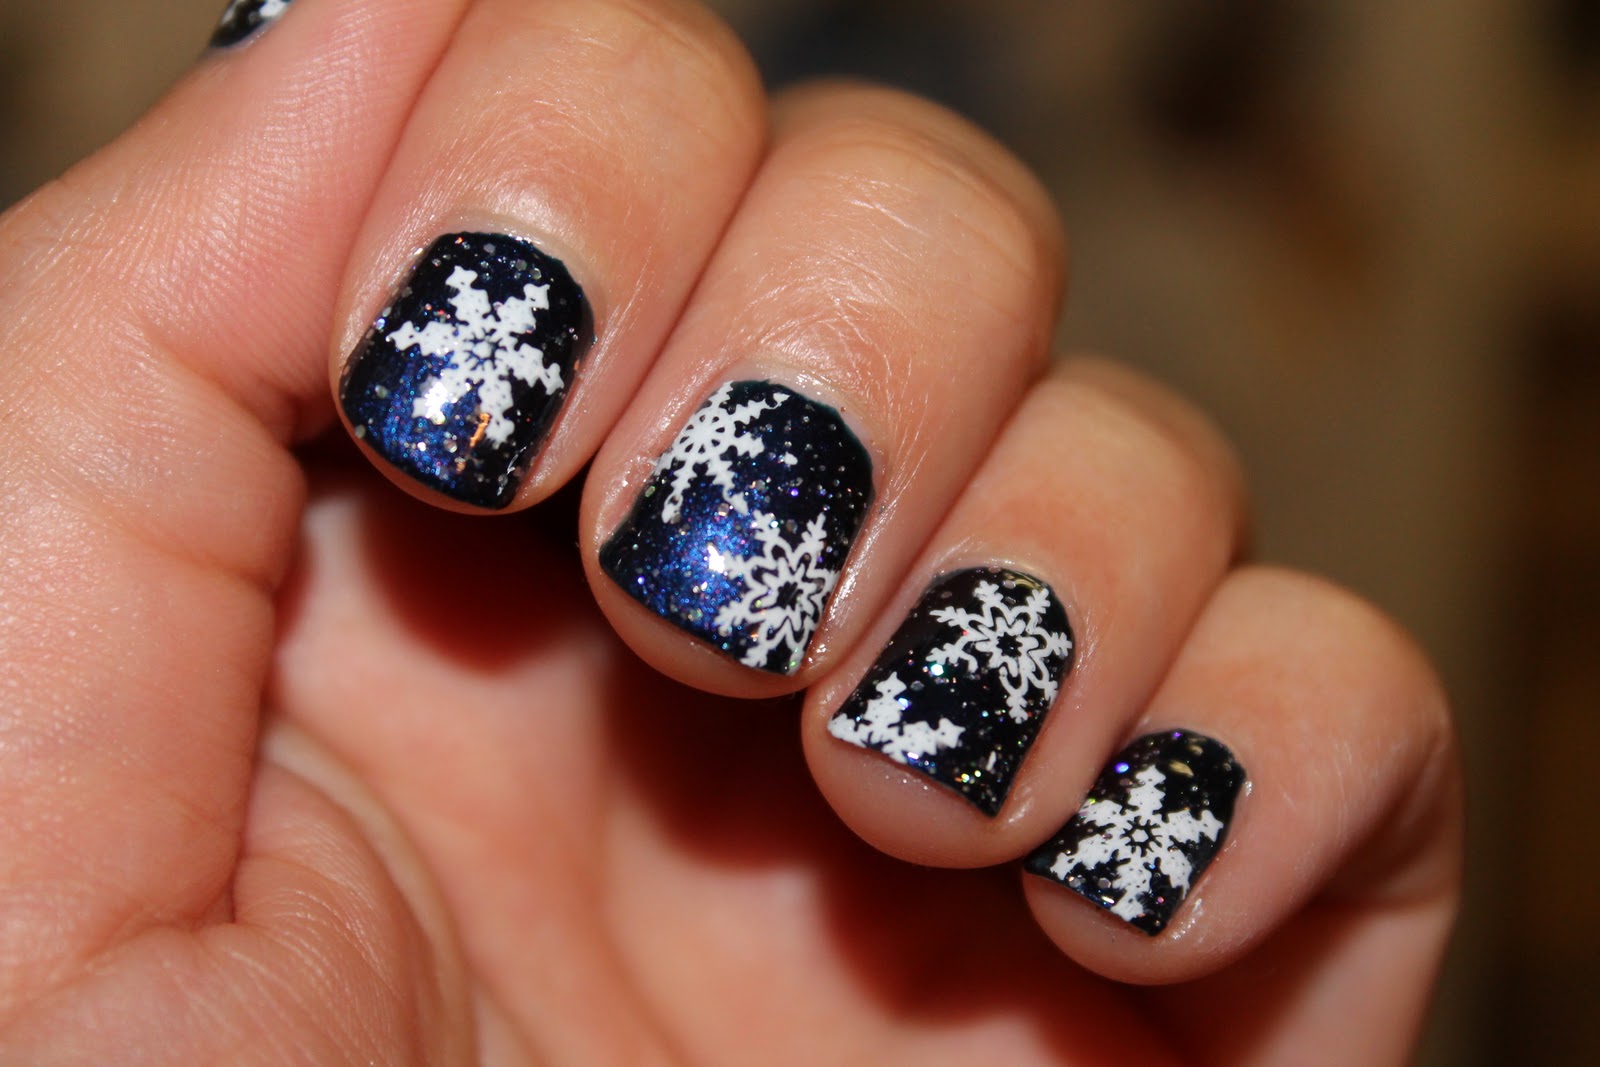 7. Snowflake Nail Designs for January - wide 4